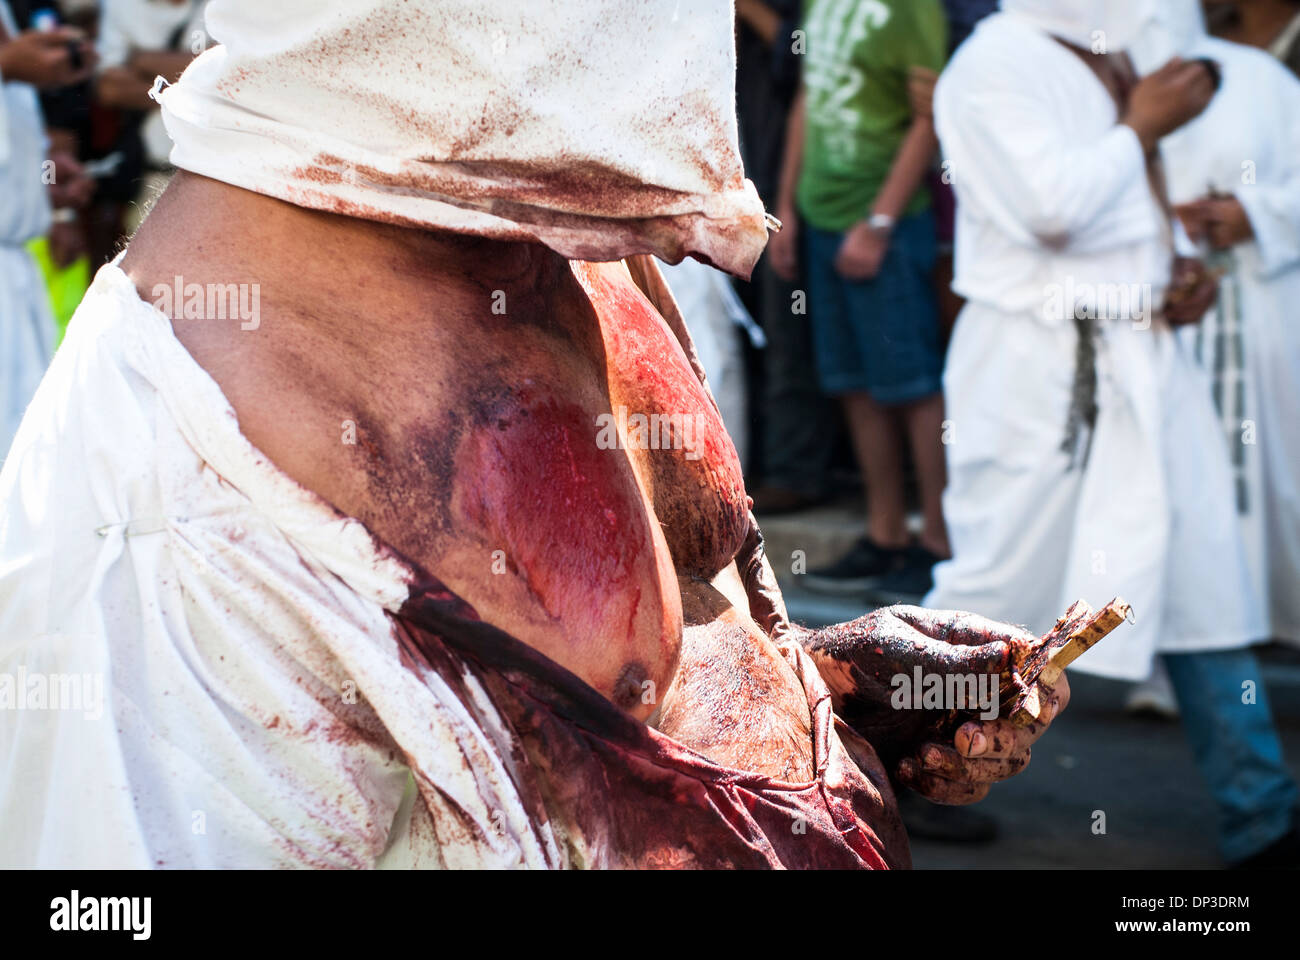 A penitent during the bloody procession for the Assumption of the Virgin Mary in Guardia Sanframondi, Campania, Italy Stock Photo